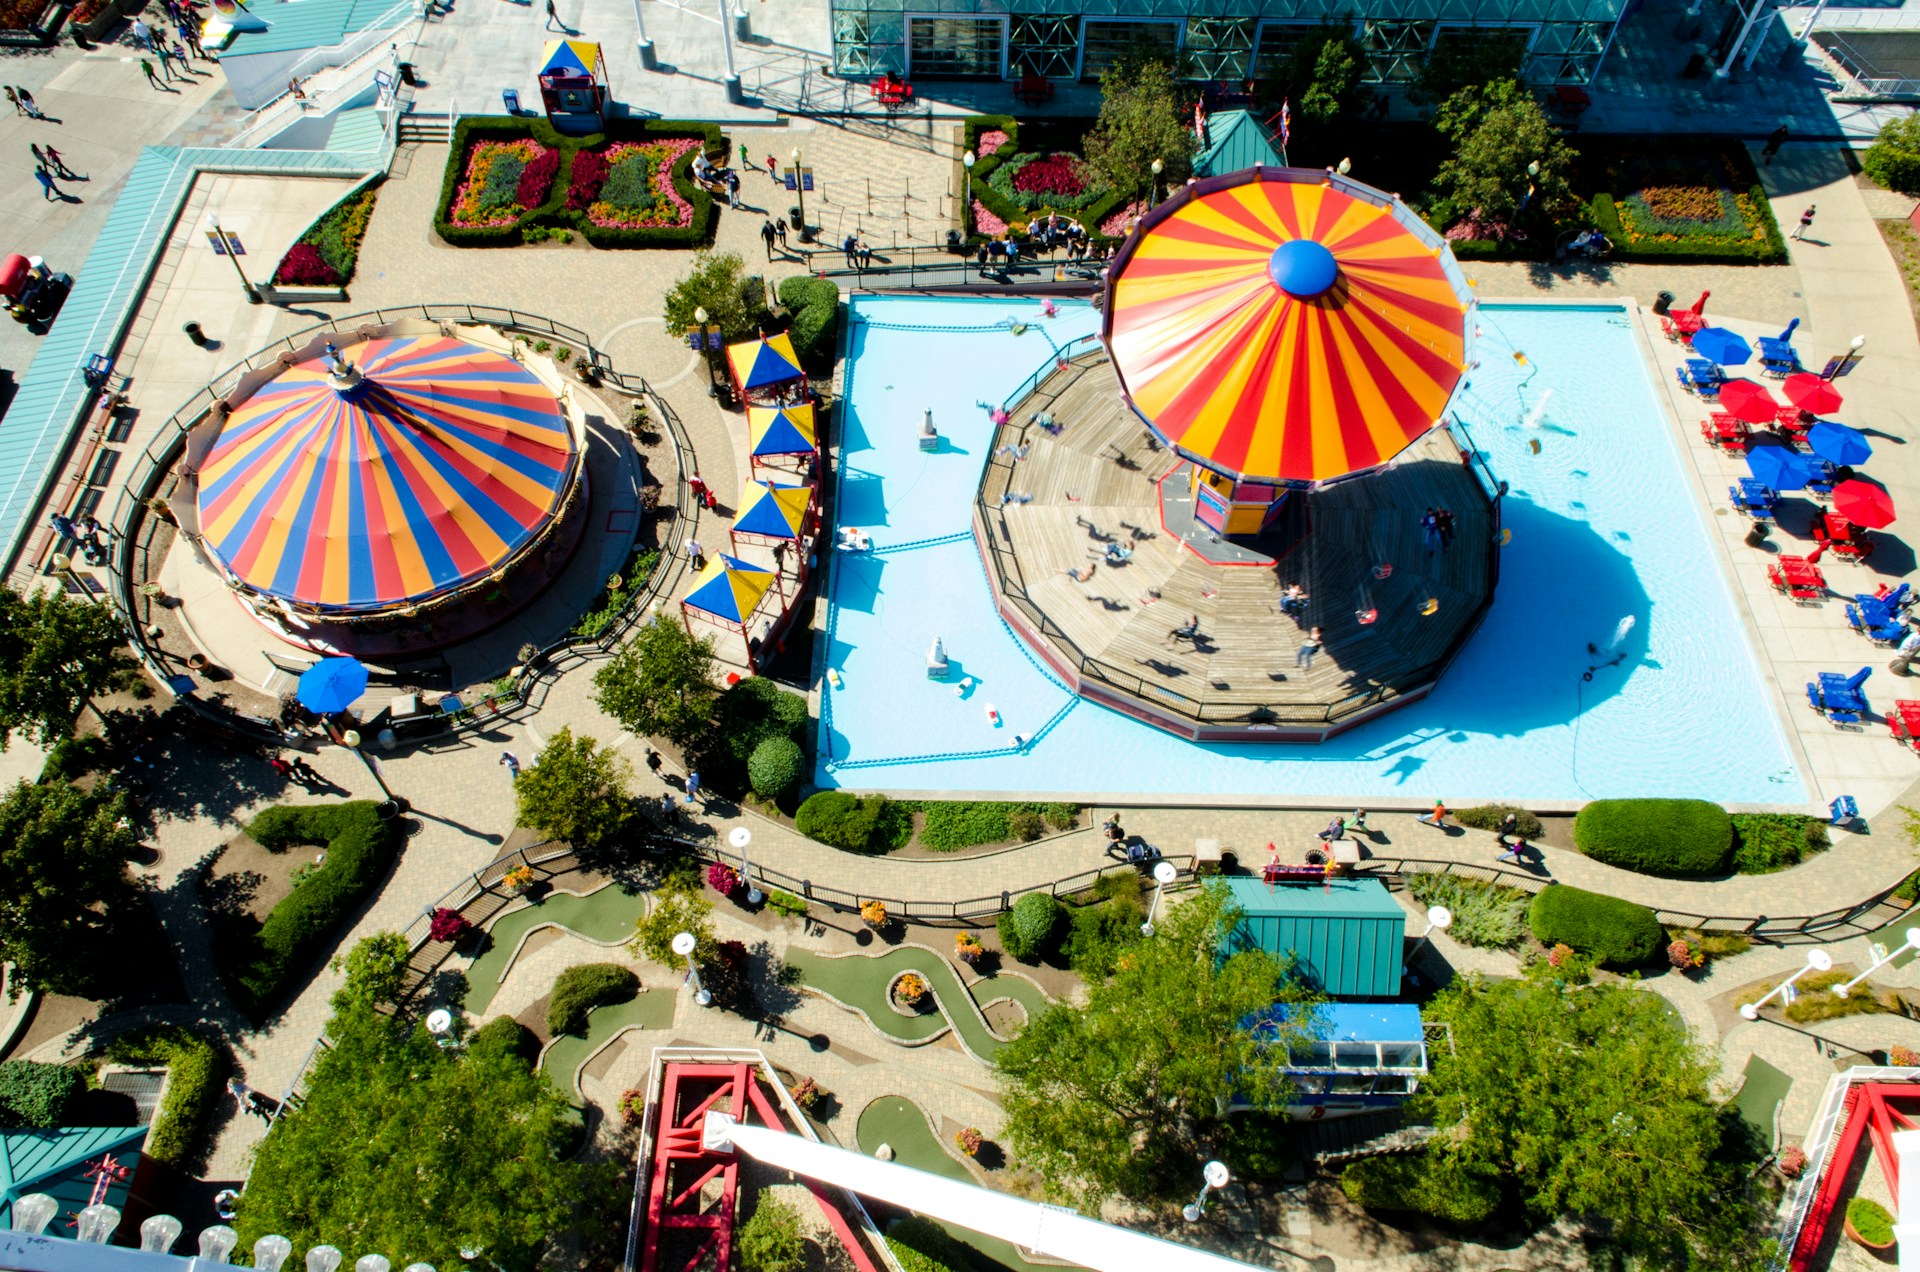 birds eye view of theme park with a pool